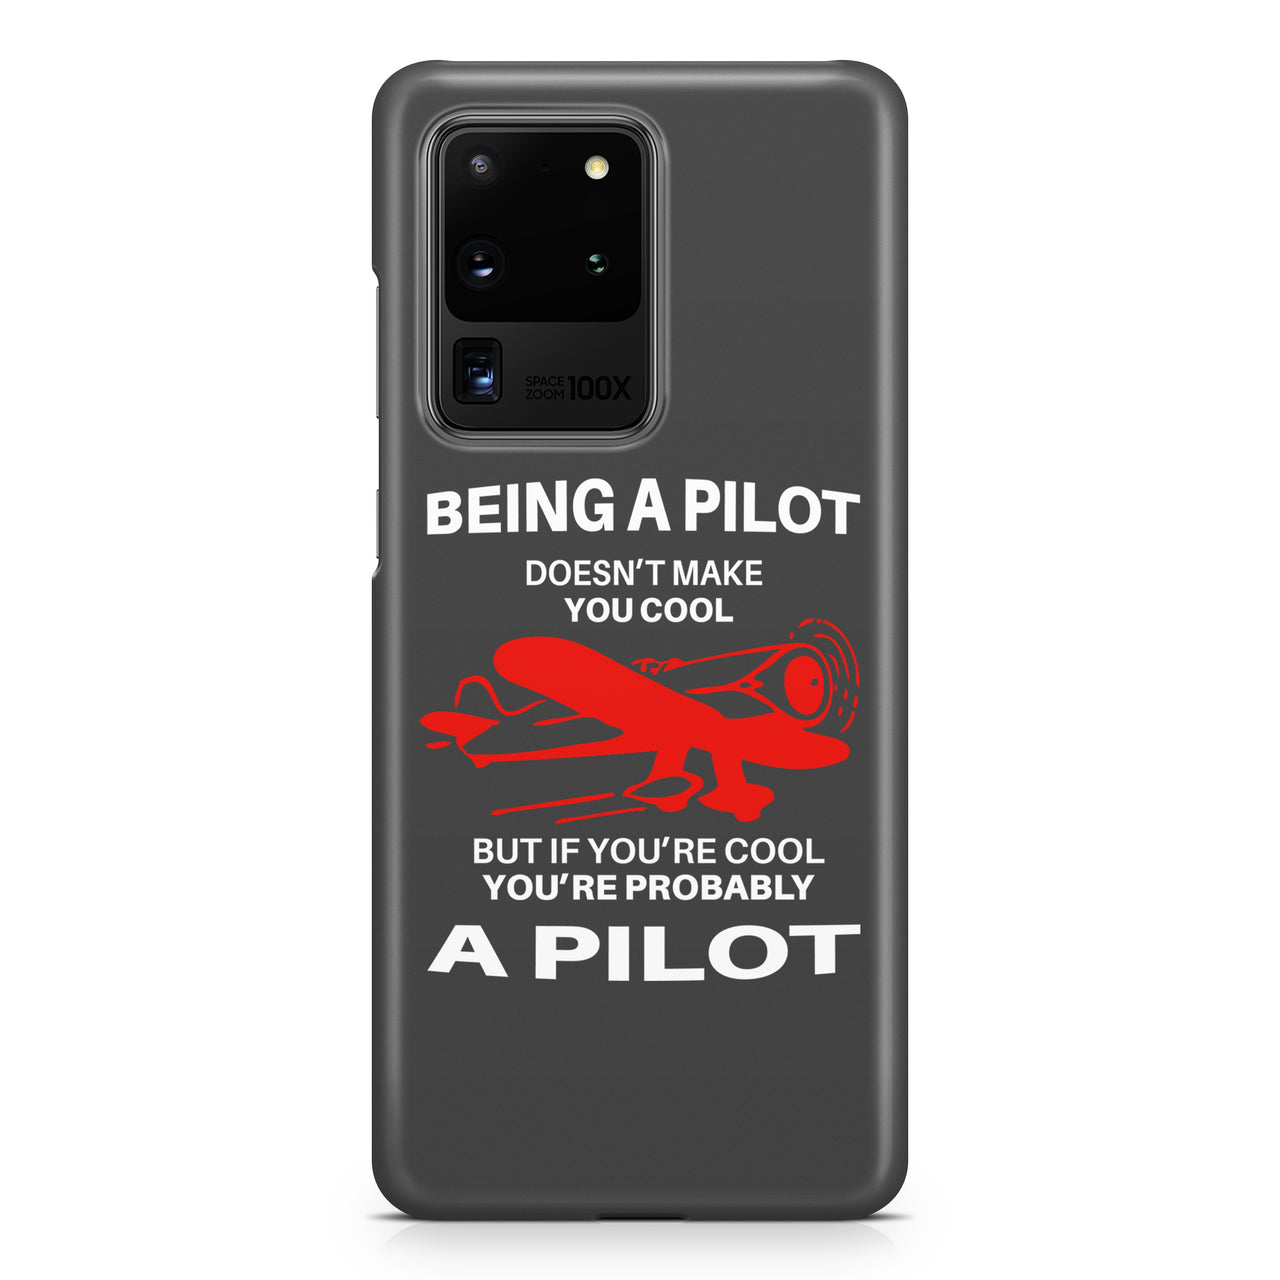 If You're Cool You're Probably a Pilot Samsung A Cases